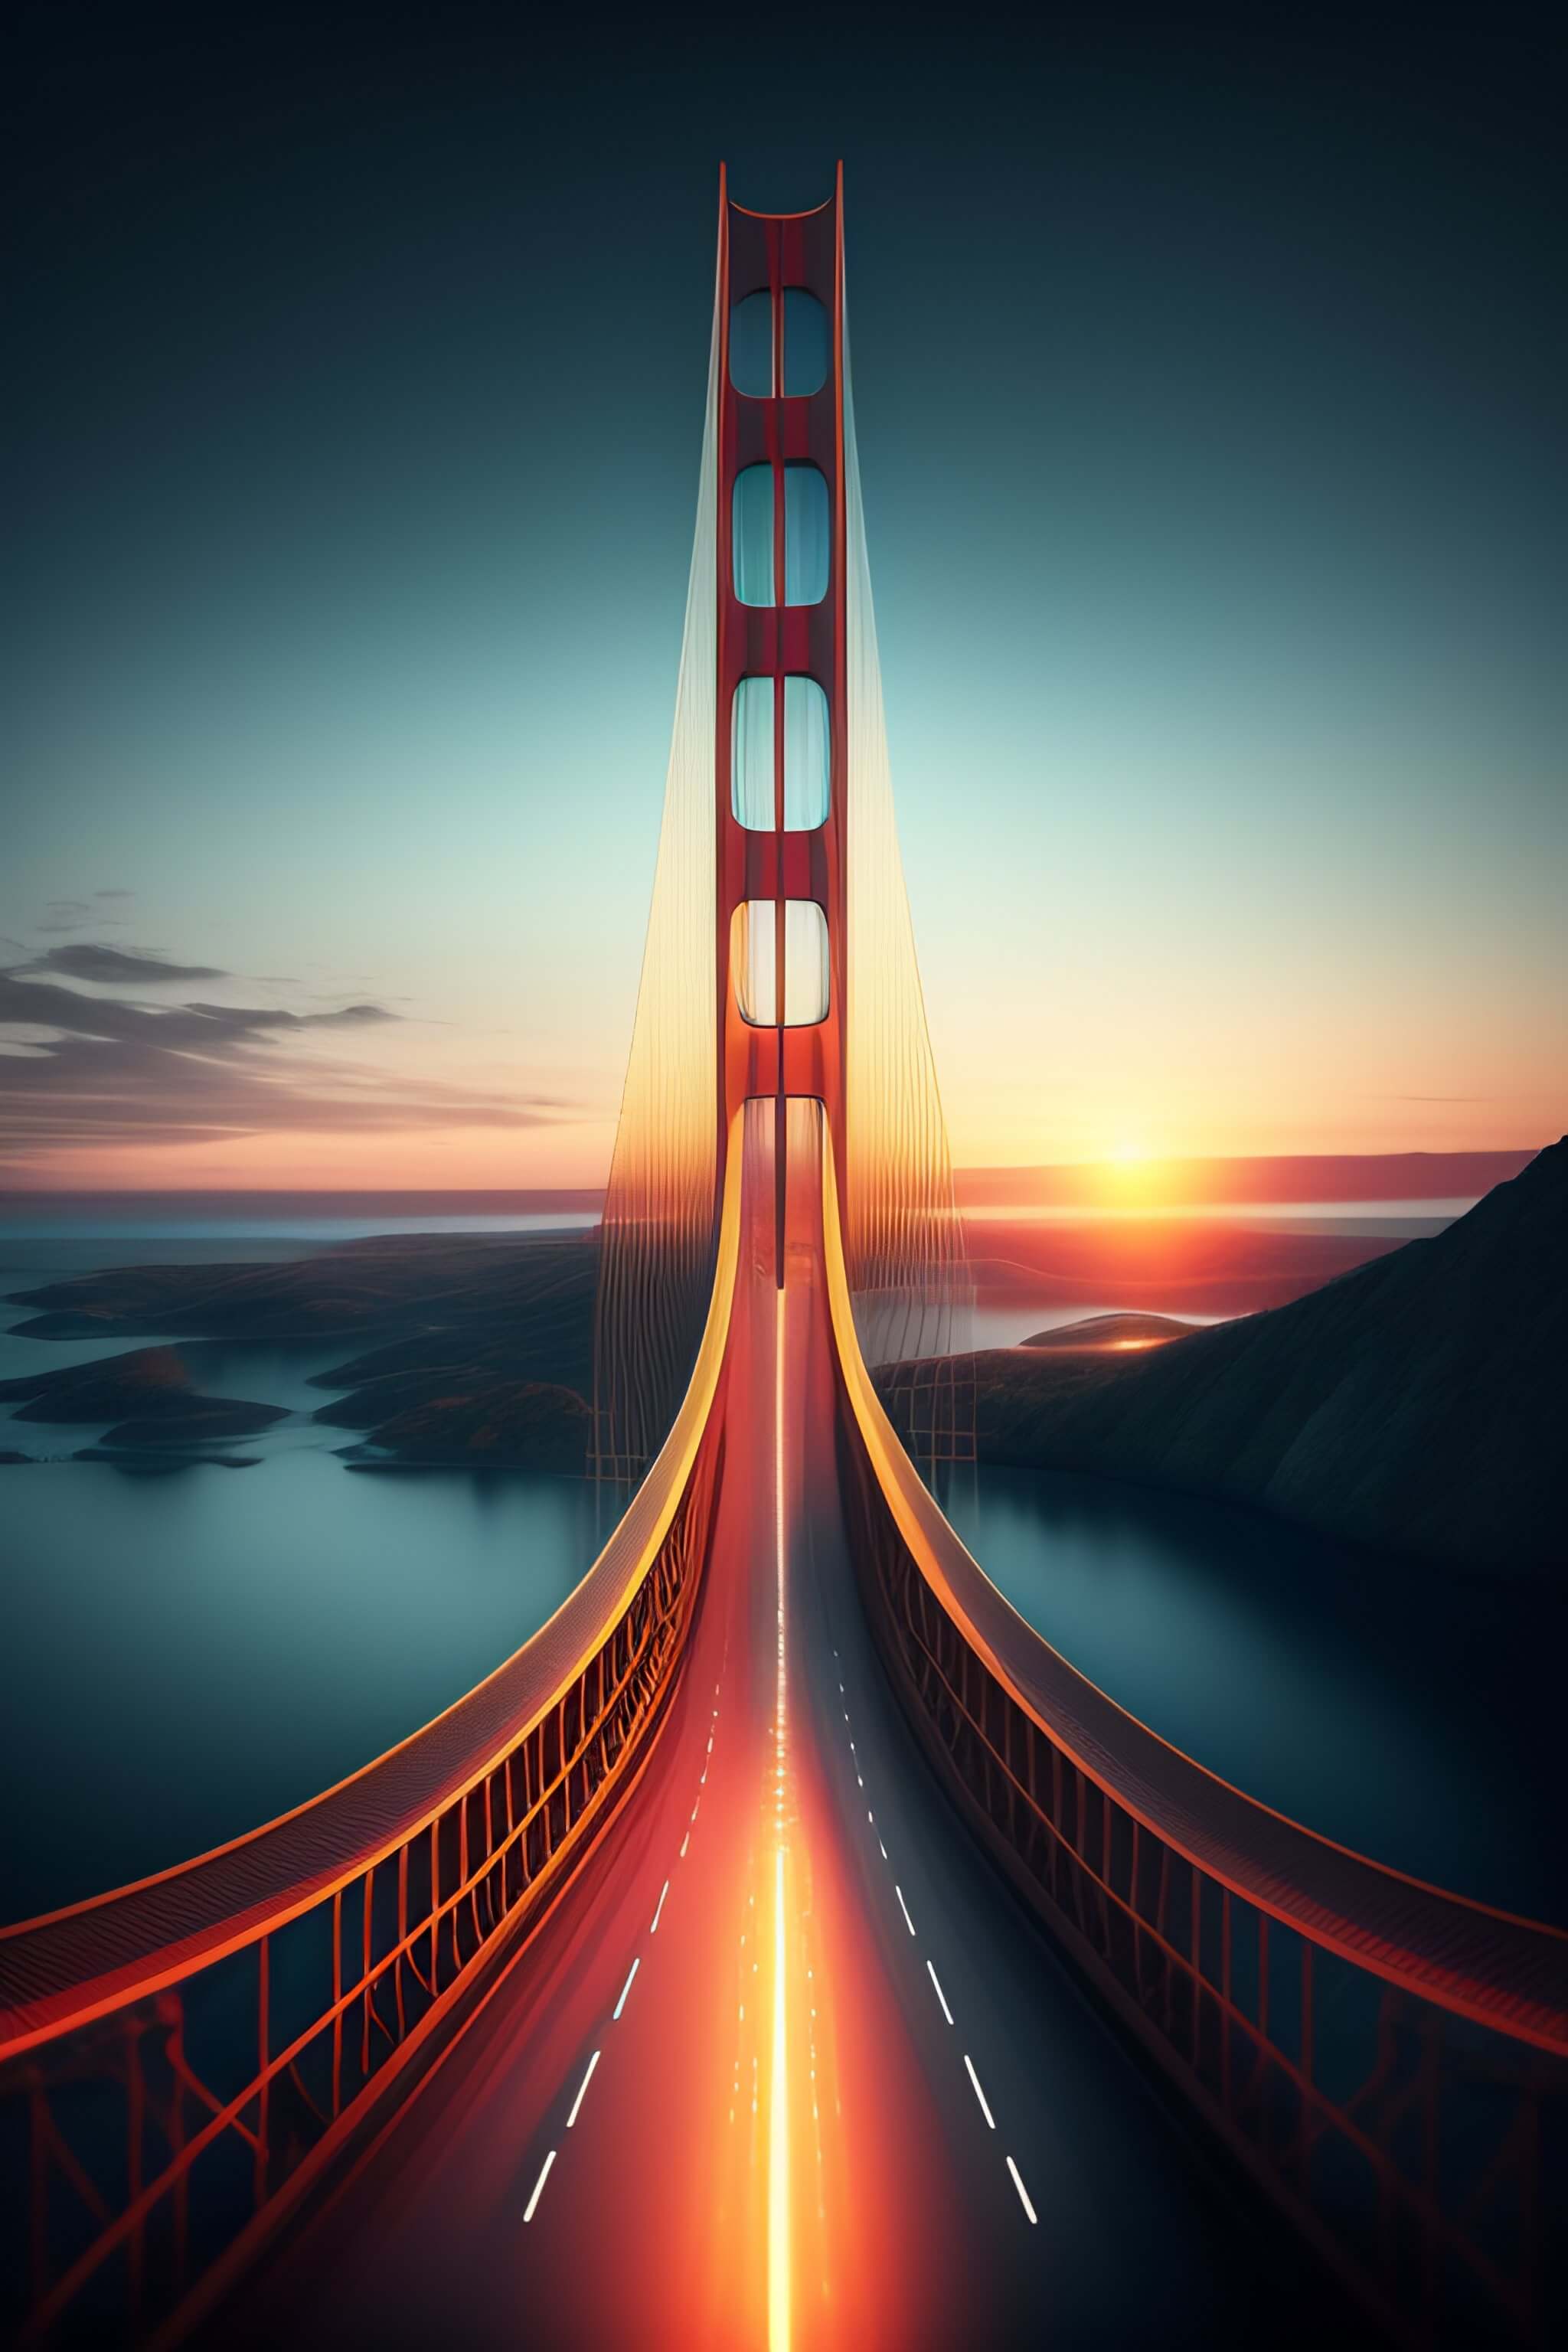 7. San Francisco 🌉: The Golden Gate to Urban Sophistication